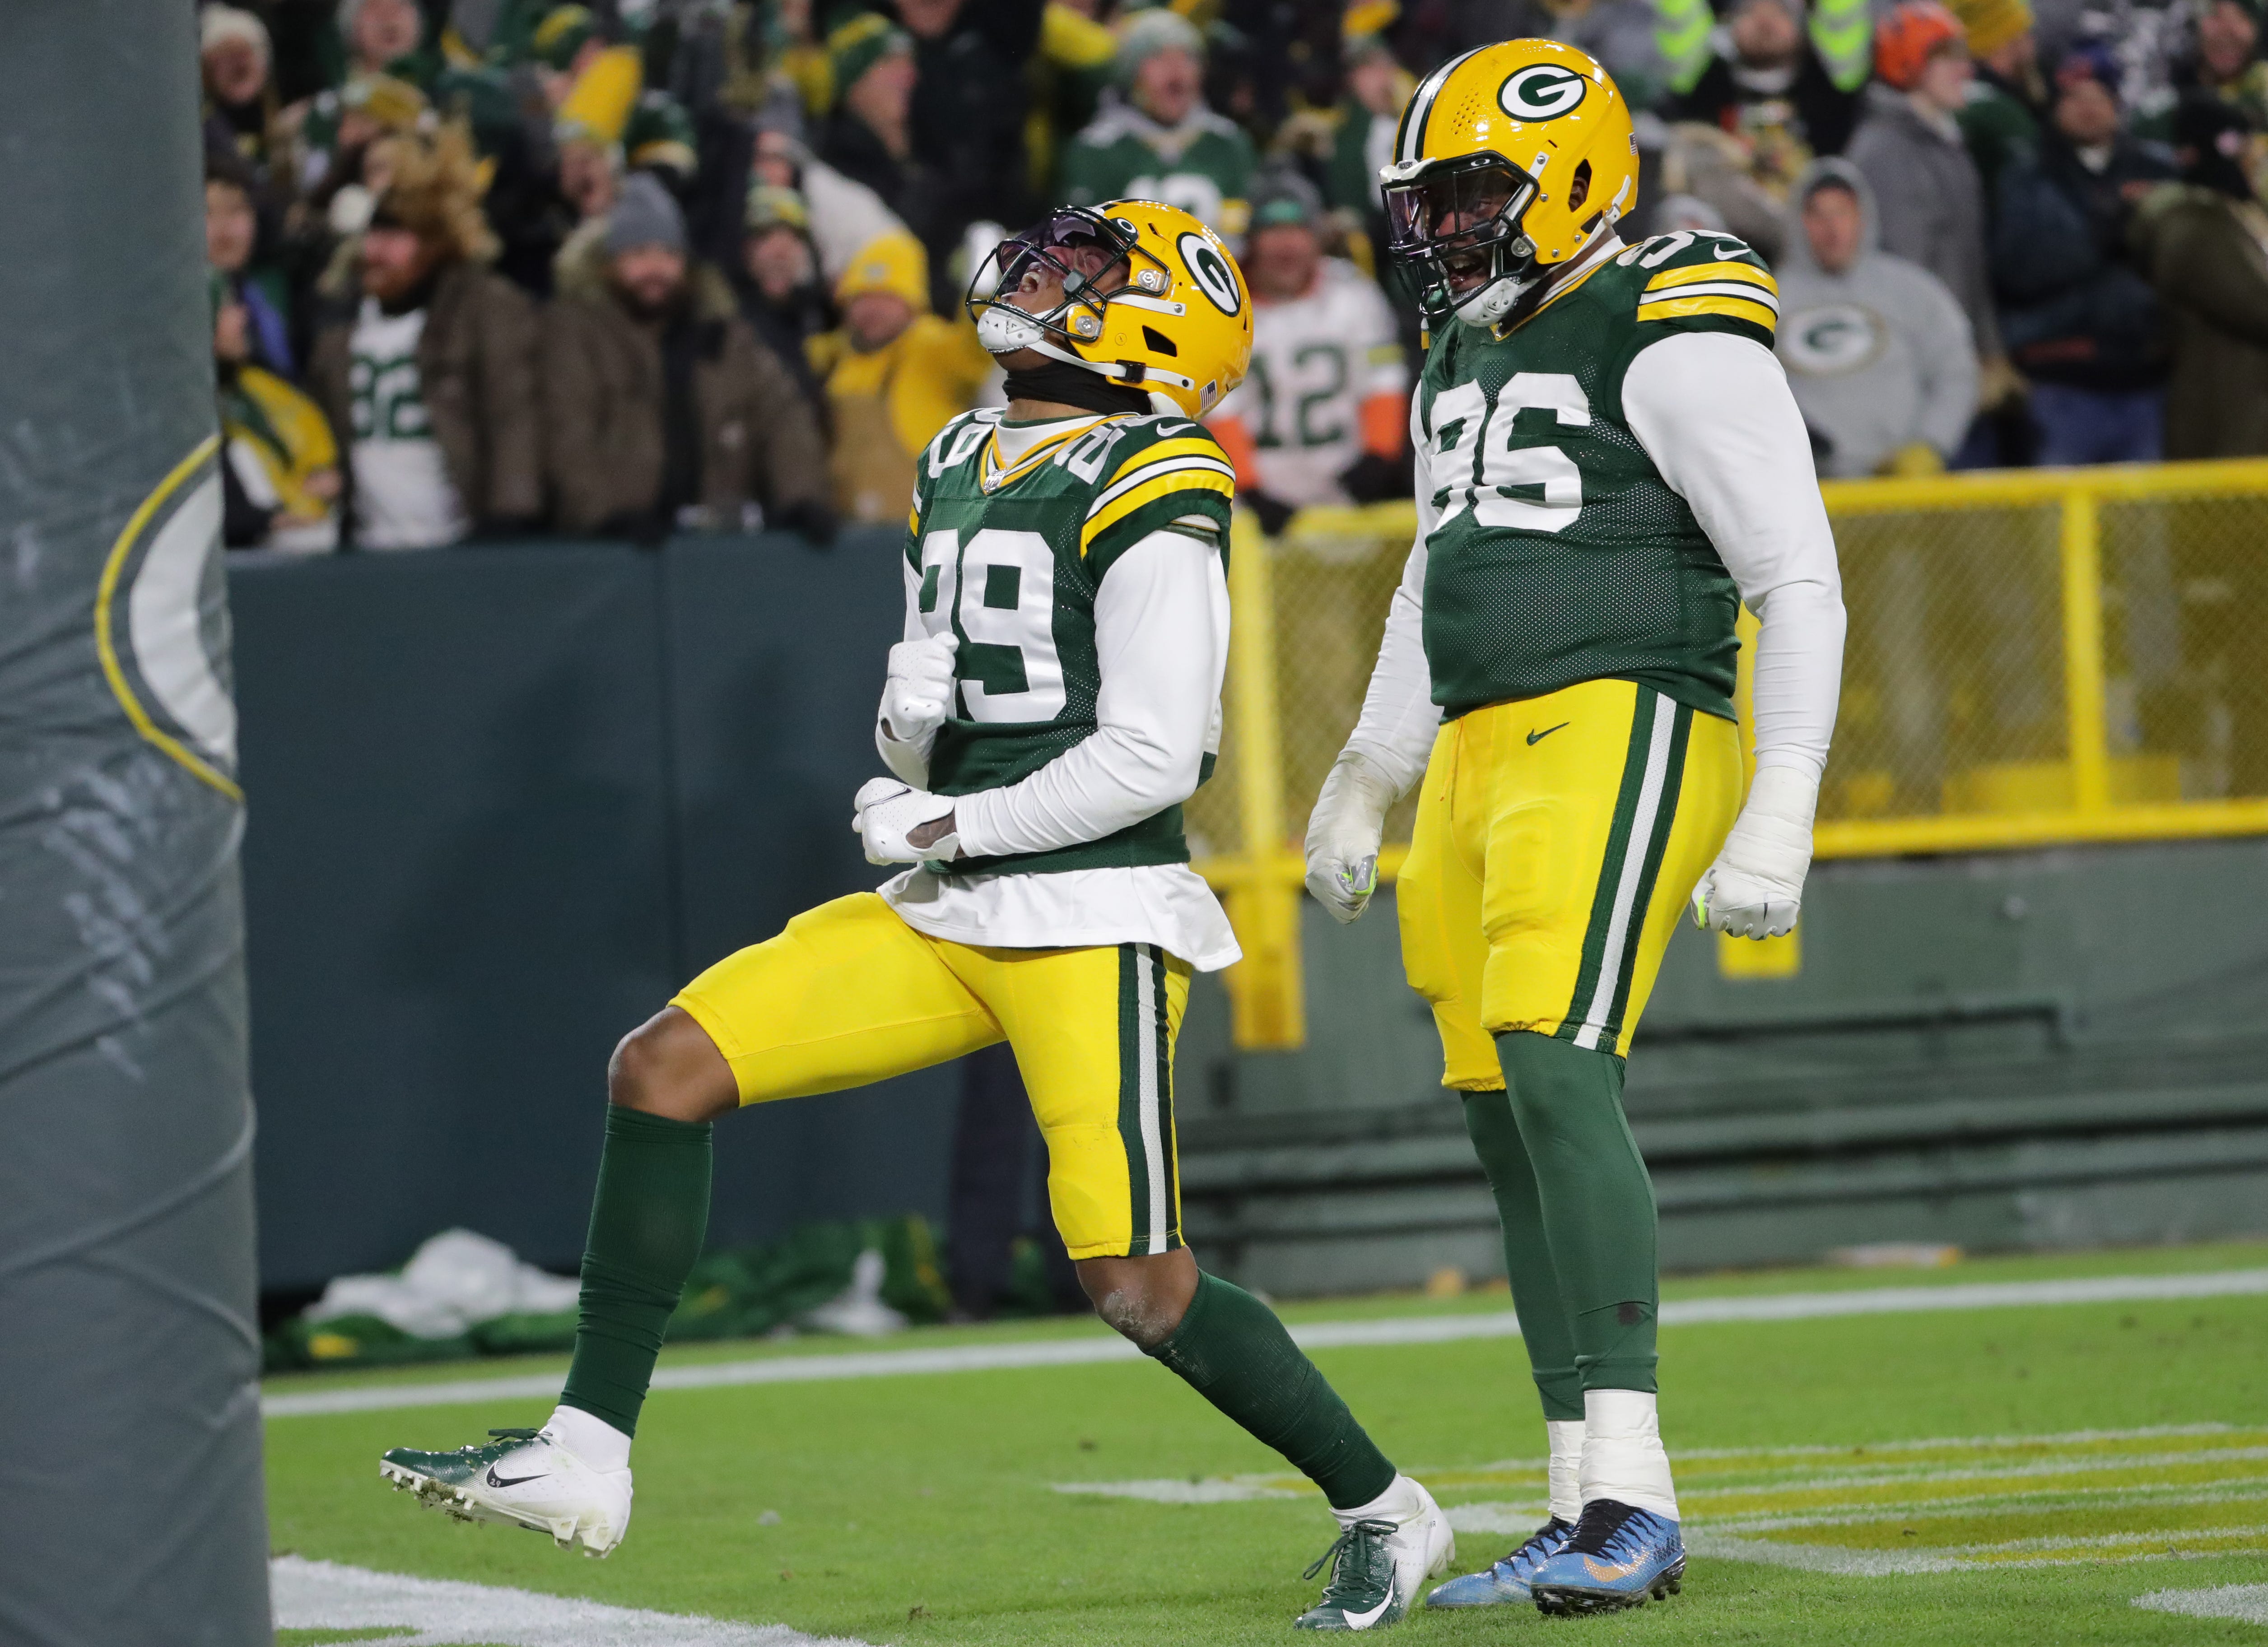 Green Bay Packers cornerback Rasul Douglas (29) exults after returning an interception 55 yard for a touchdown during the second quarter of their game Sunday, December 12, 2021 at Lambeau Field in Green Bay, Wis. The Green Bay Packers beat the Chicago Bears 45-30.